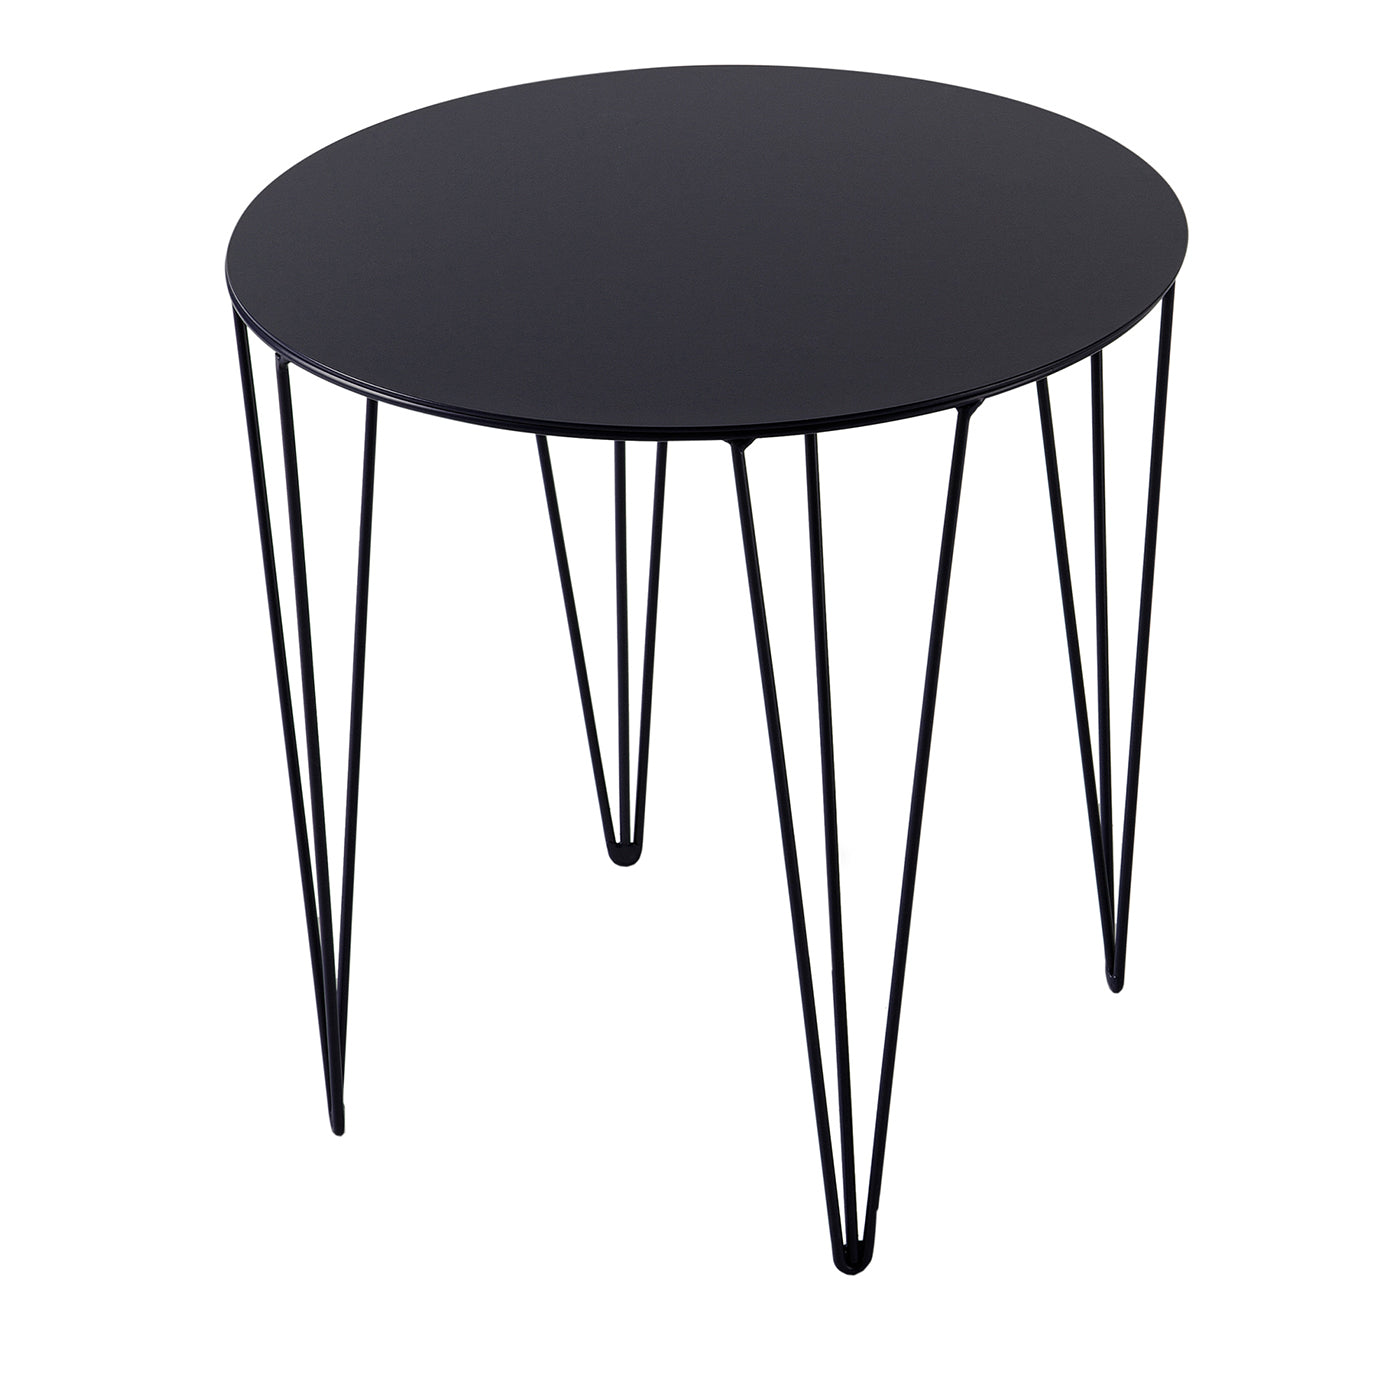 Chele Black Round Coffee Table #1 - Main view